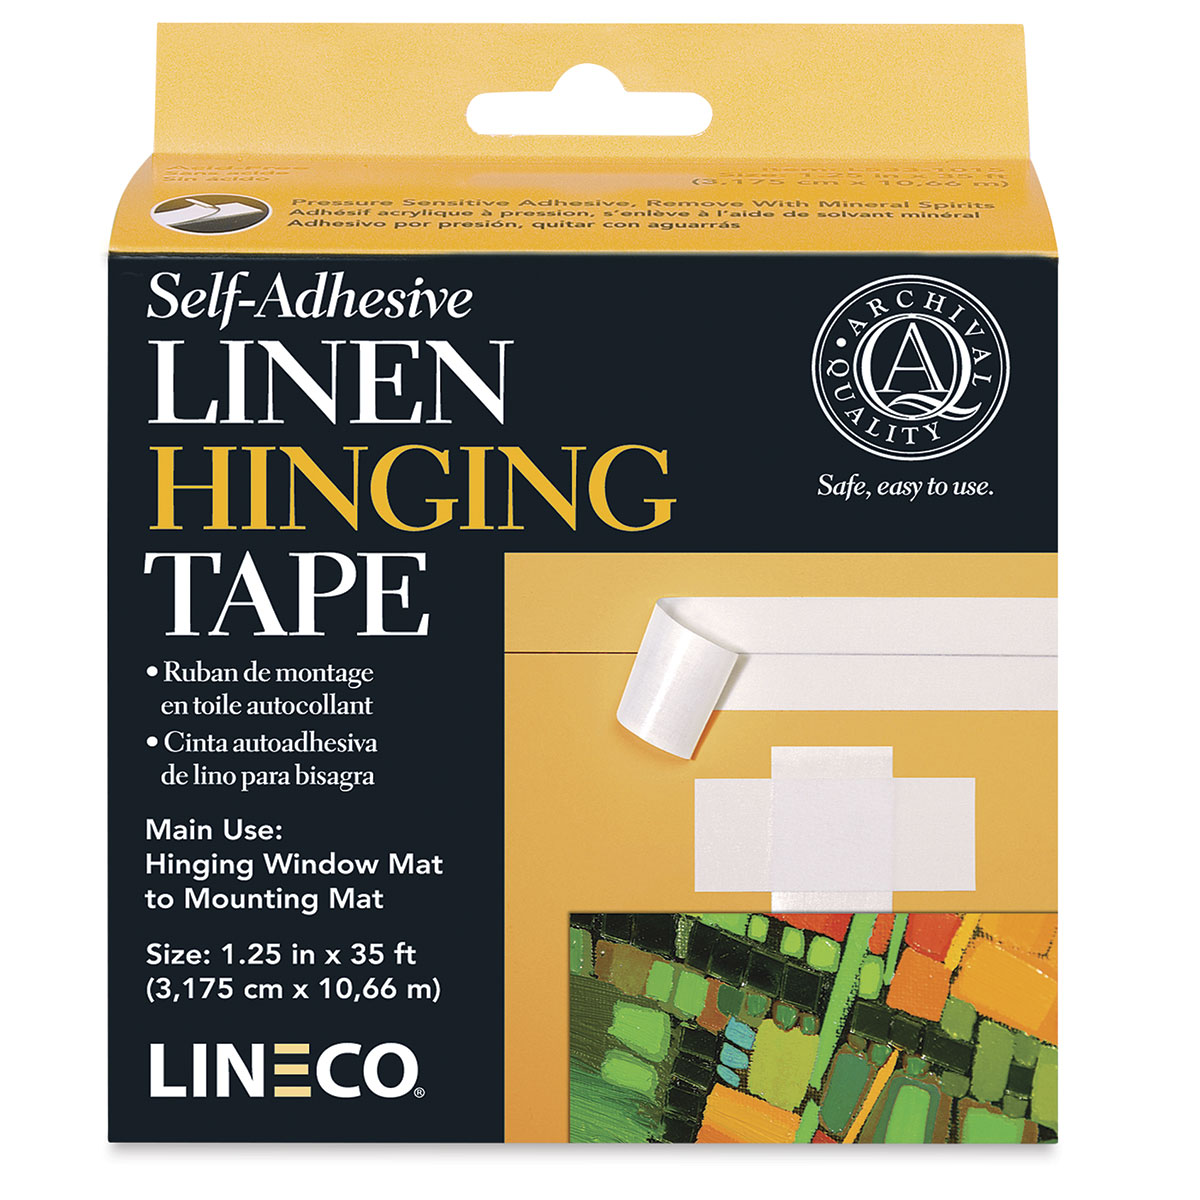 Archival Tape and Adhesives